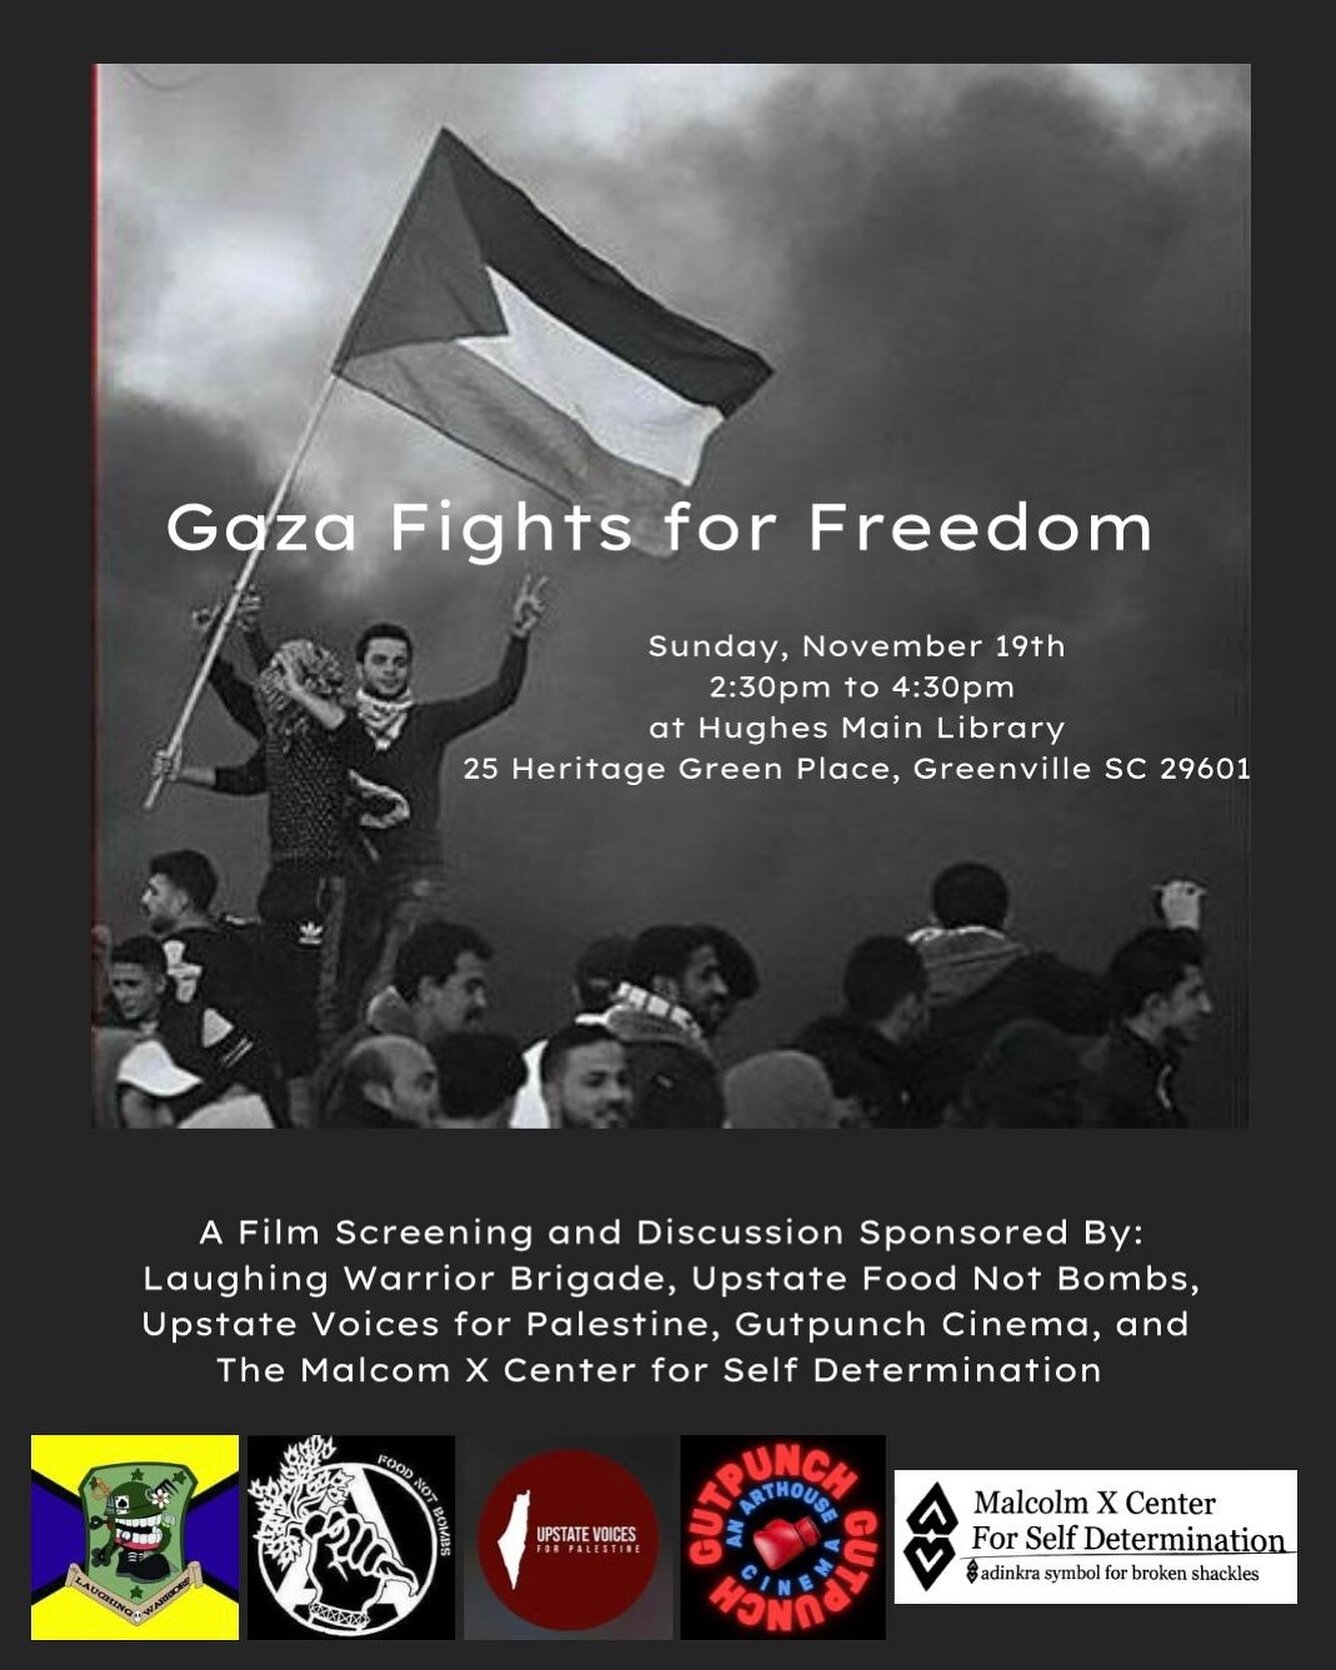 Free Screening of Documentary Gaza Fights for Freedom at Greenville Main Library. We believe that education is vital to developing a well developed opinion on global events. We hope that if you follow us you have an open heart and mind to hear divers